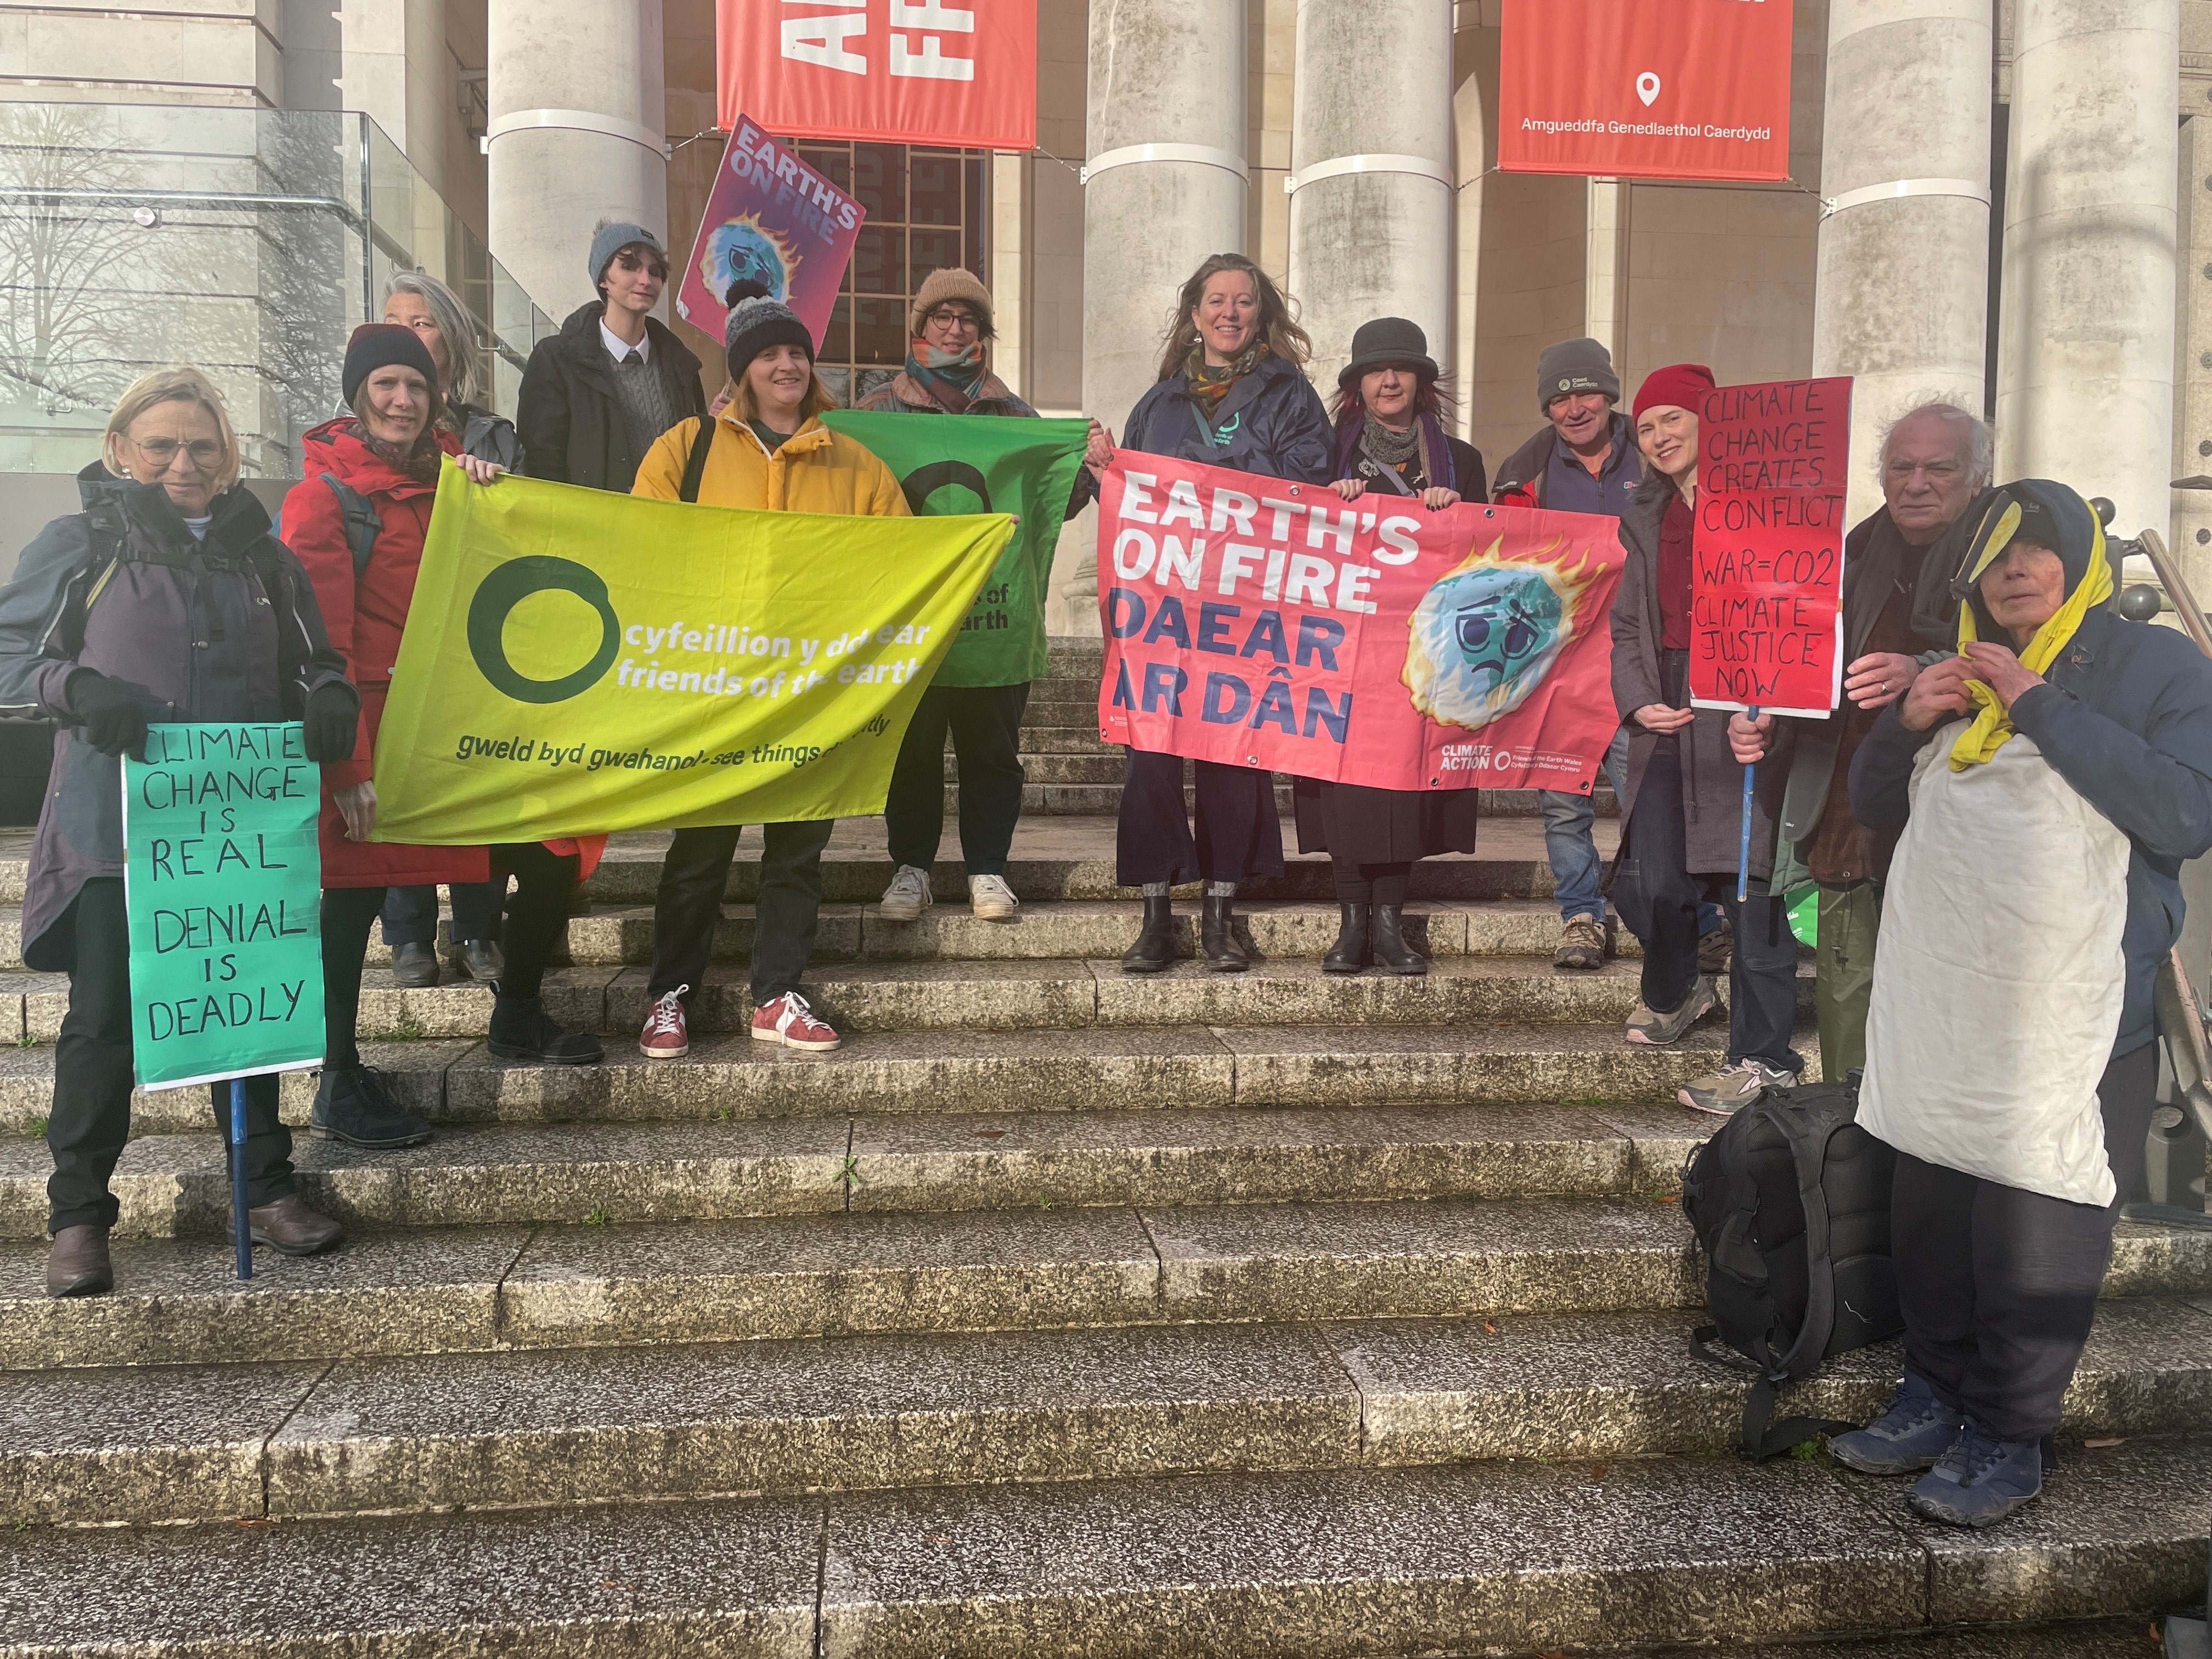 Friends of the Earth groups gather outside the museum in Cardiff before the Global Day of Action